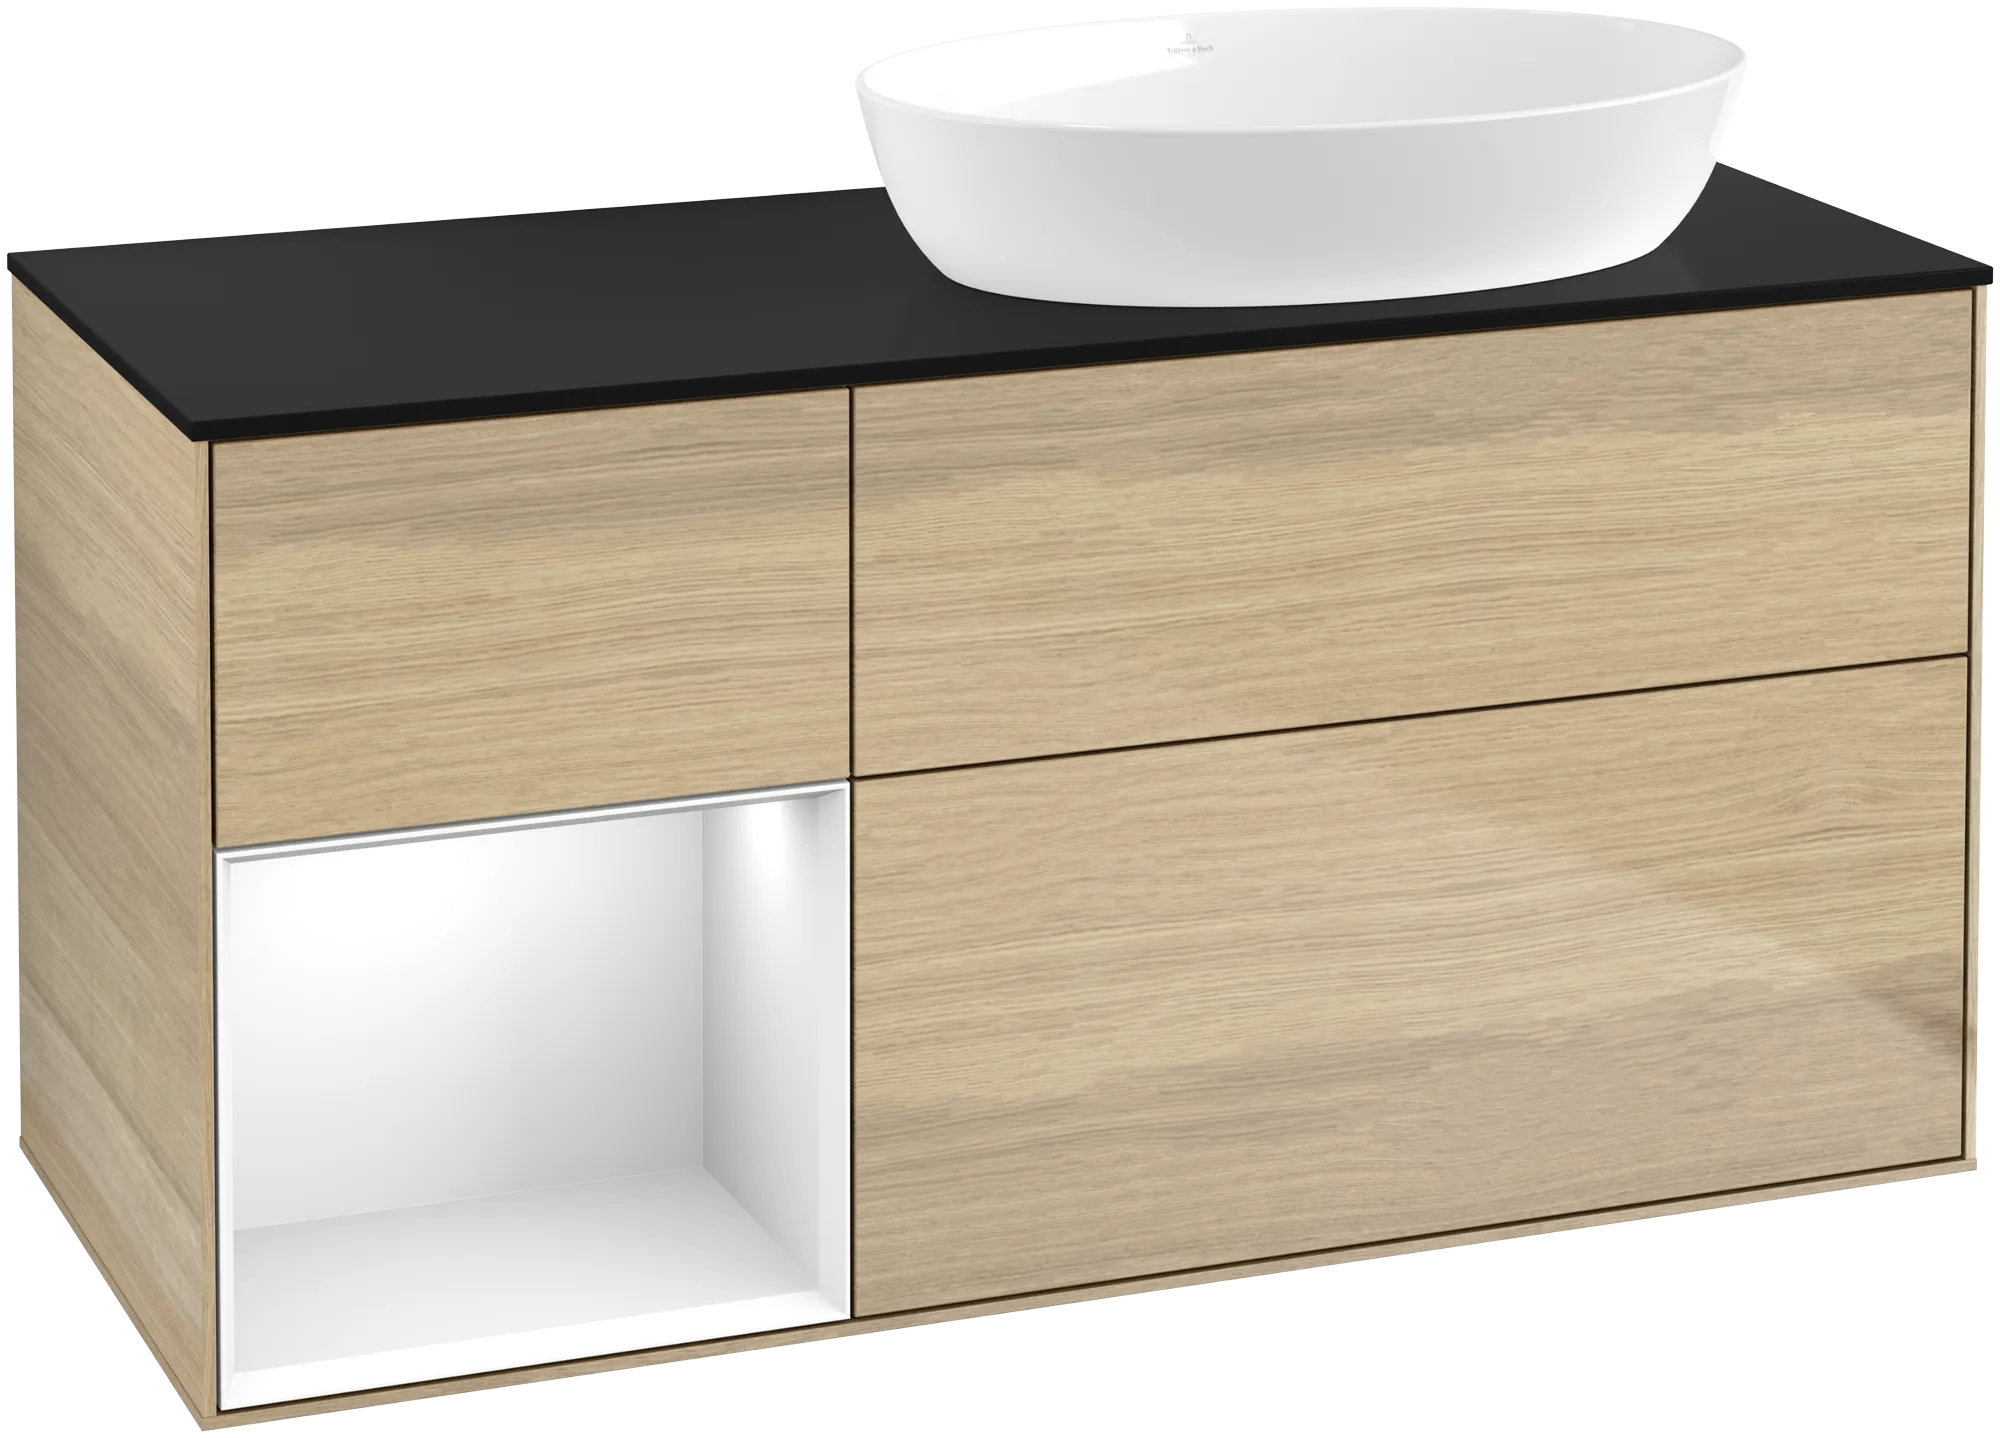 Picture of VILLEROY BOCH Finion Vanity unit, with lighting, 3 pull-out compartments, 1200 x 603 x 501 mm, Oak Veneer / Glossy White Lacquer / Glass Black Matt #GA42GFPC